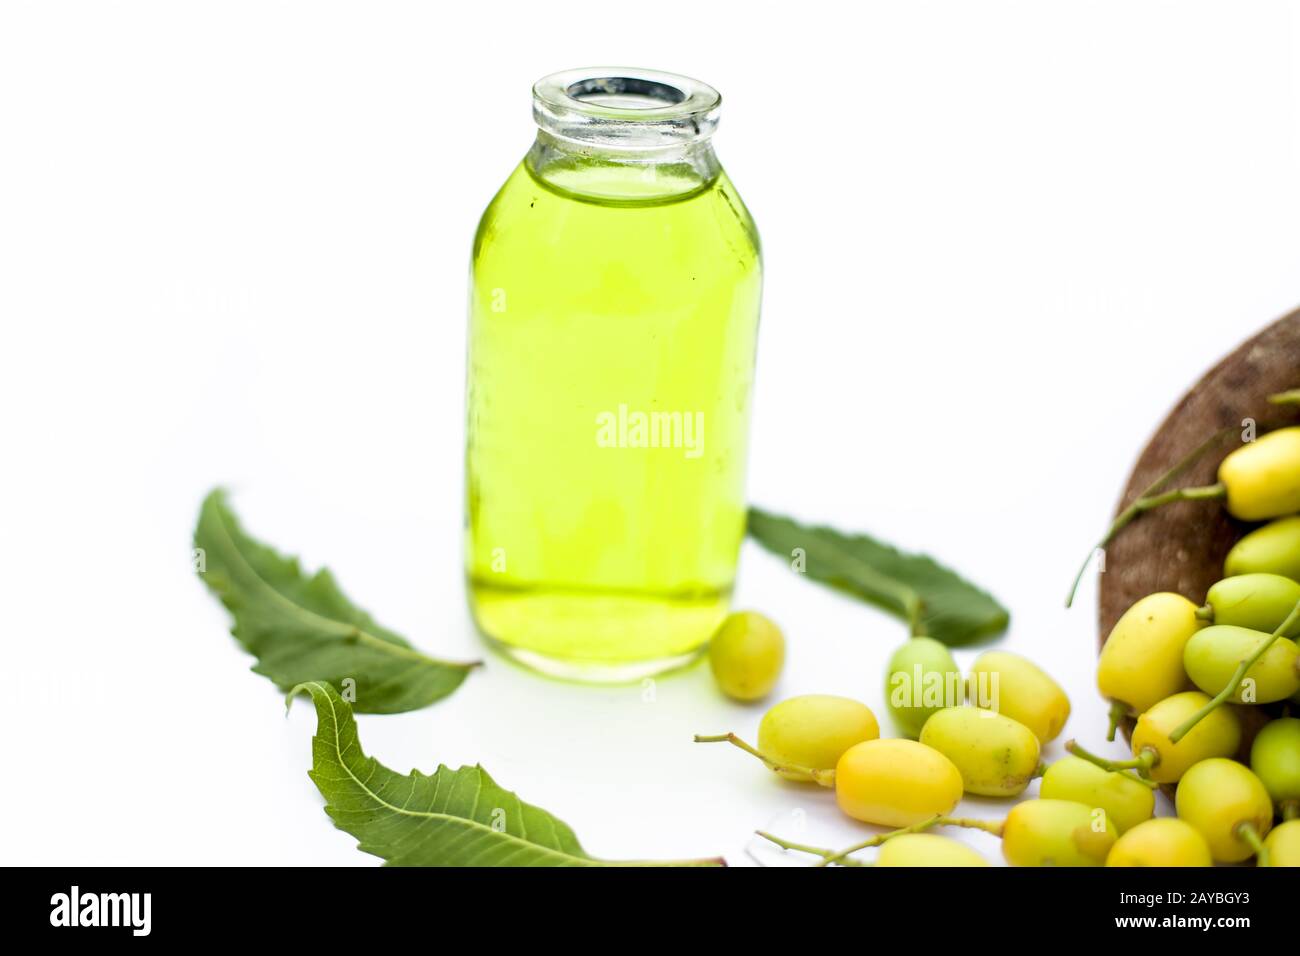 Fresh green neem fruit of Indian Lilac fruit in a clay bowl isolated on white along with its oil in a transparent glass bottle.Horizontal shot. Stock Photo